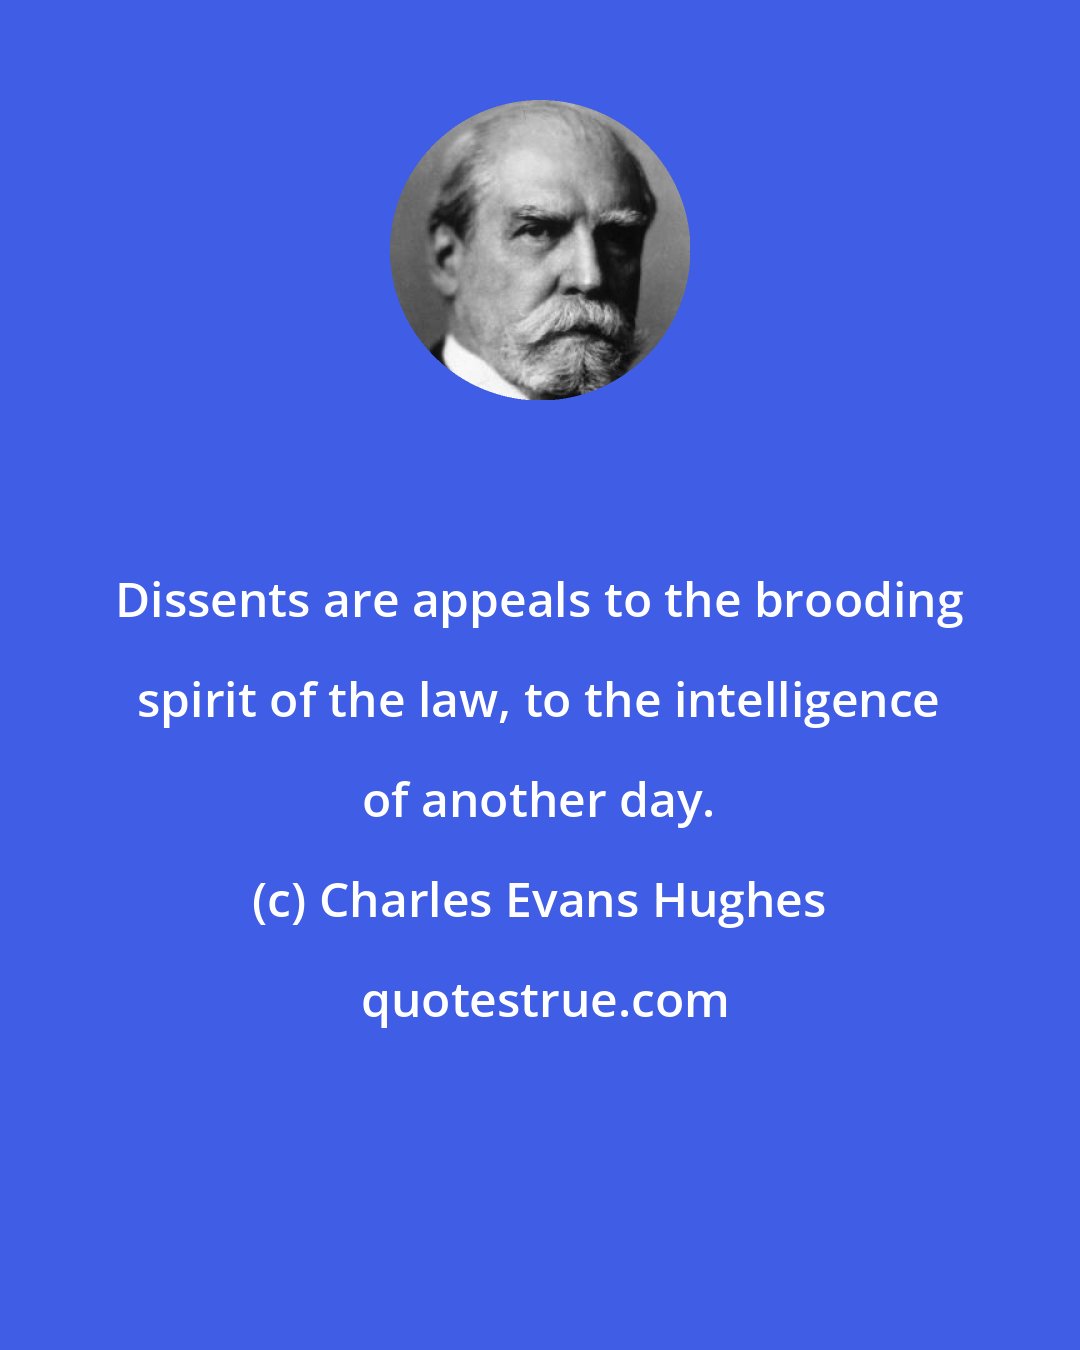 Charles Evans Hughes: Dissents are appeals to the brooding spirit of the law, to the intelligence of another day.